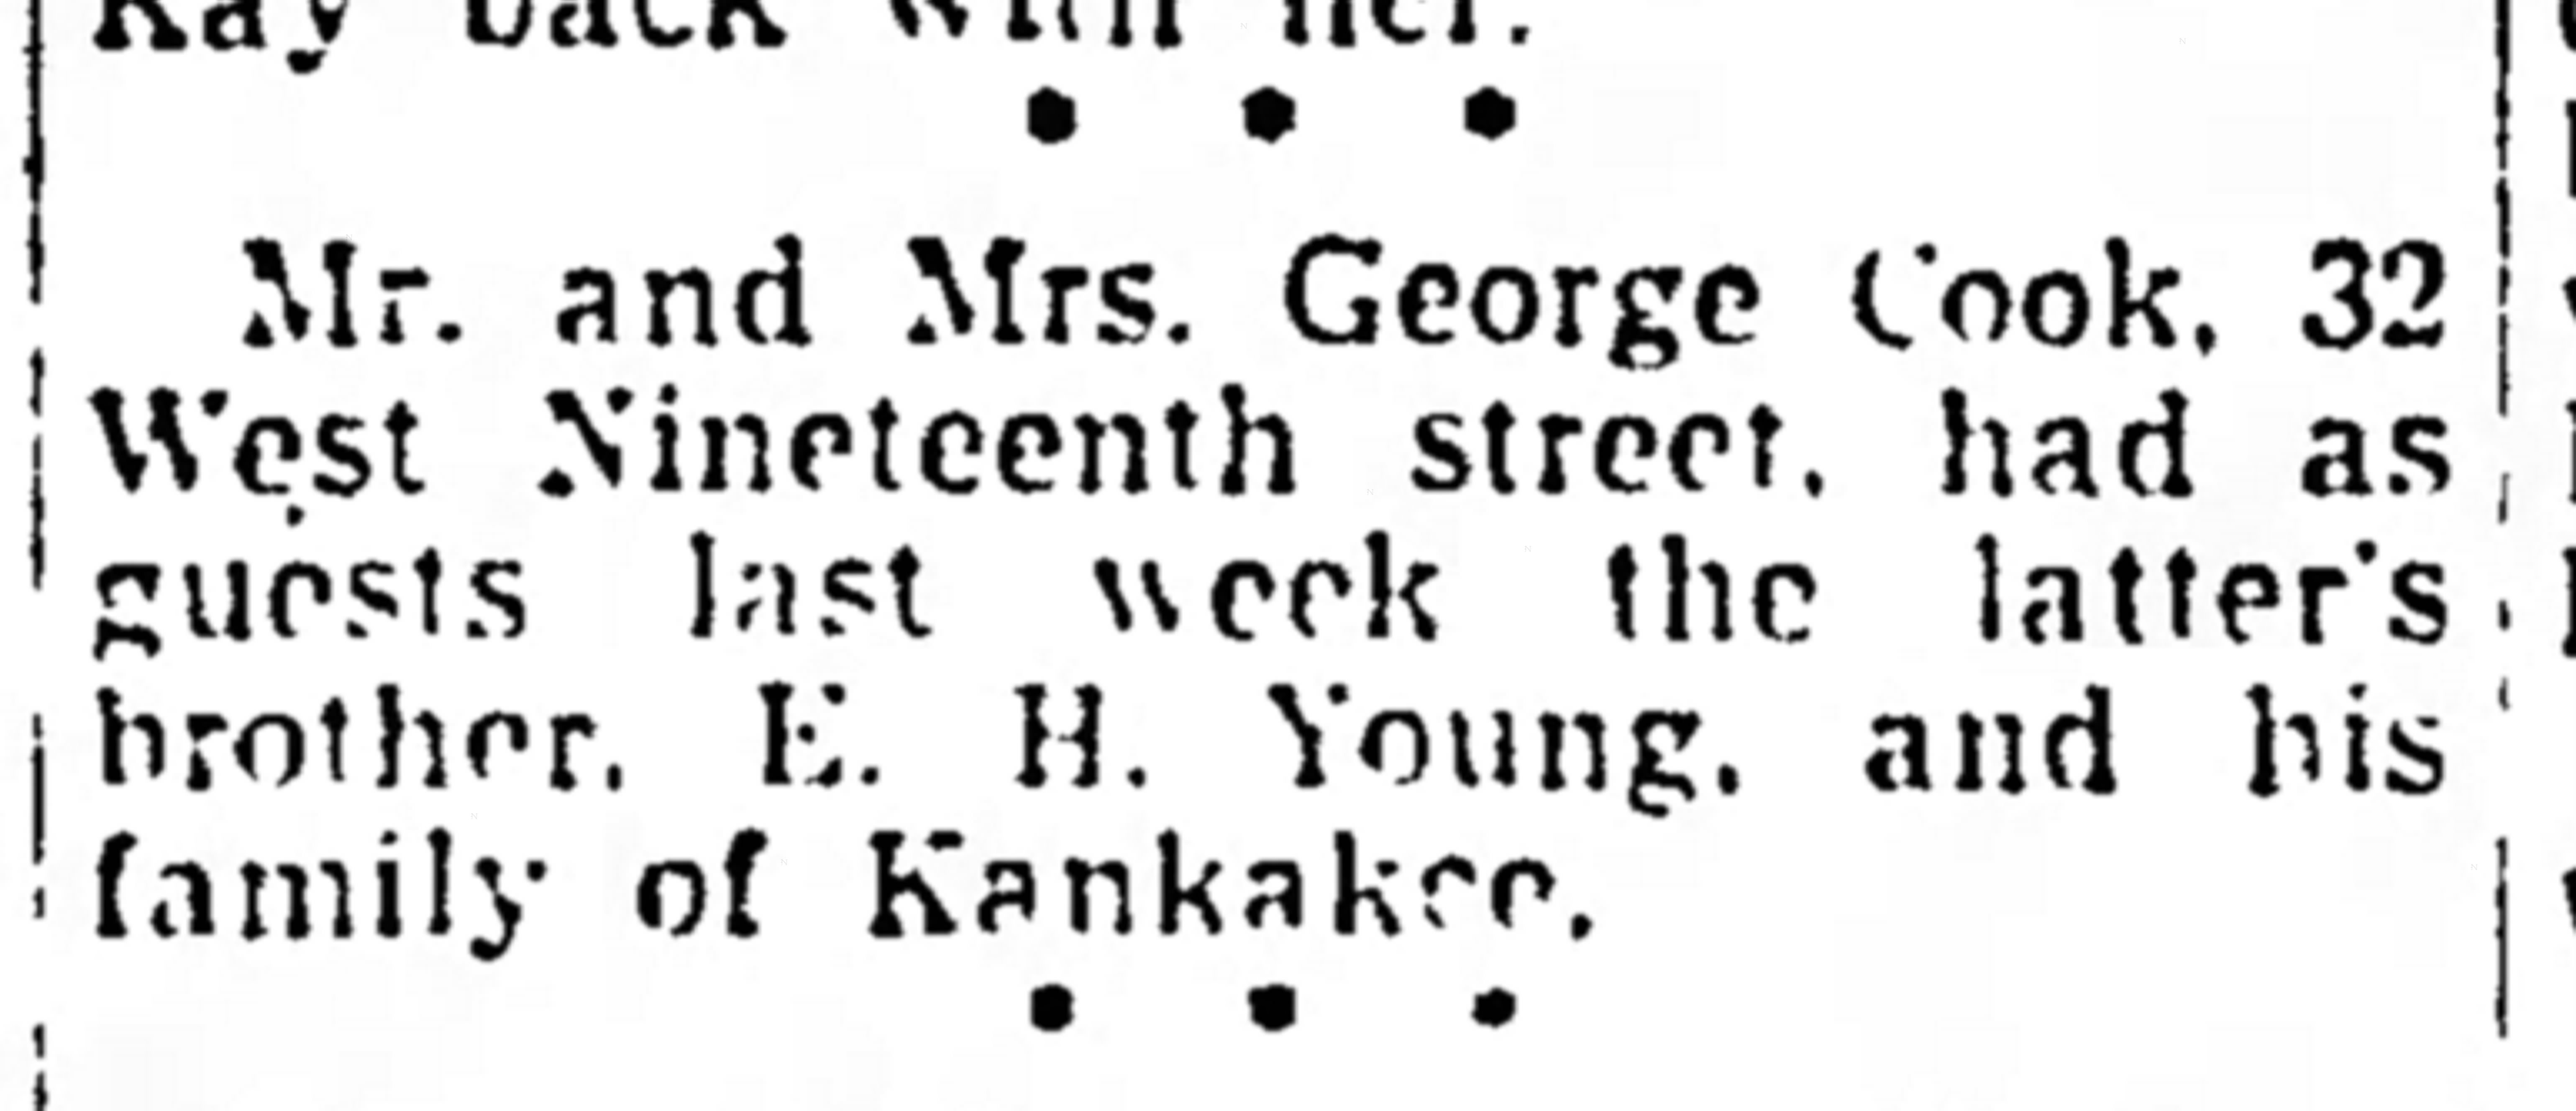 NEWSPAPER: Mrs. George Cook's brother visits